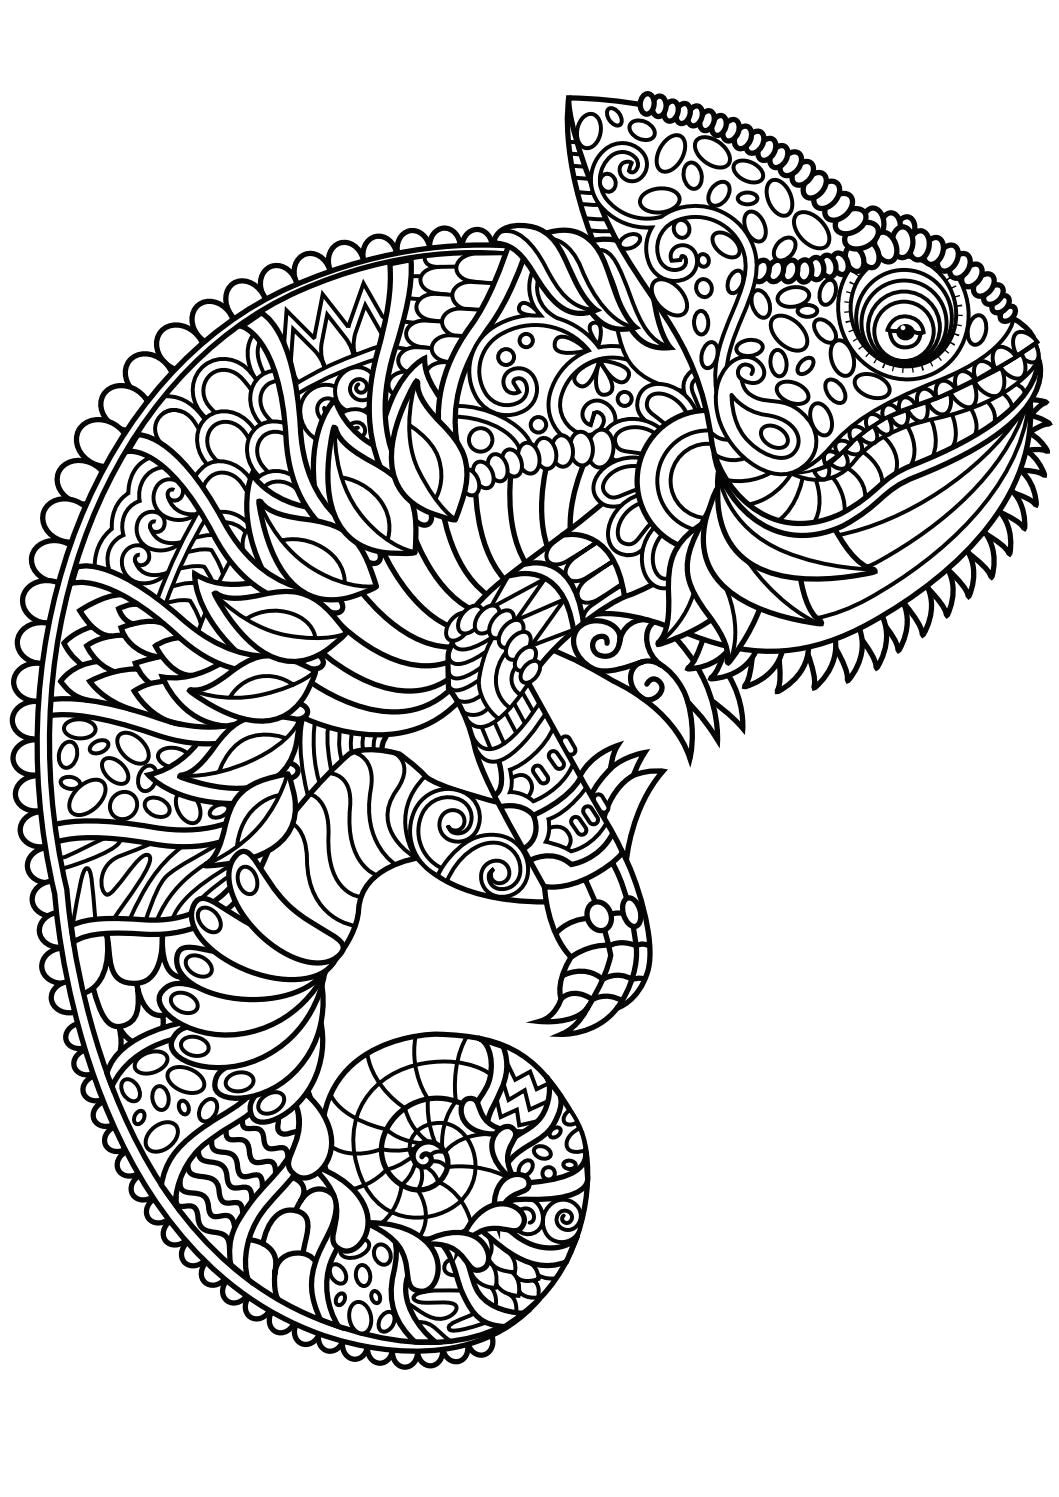 Drawing Ideas Book Pdf Animal Coloring Pages Pdf Coloring Animals Coloring Pages